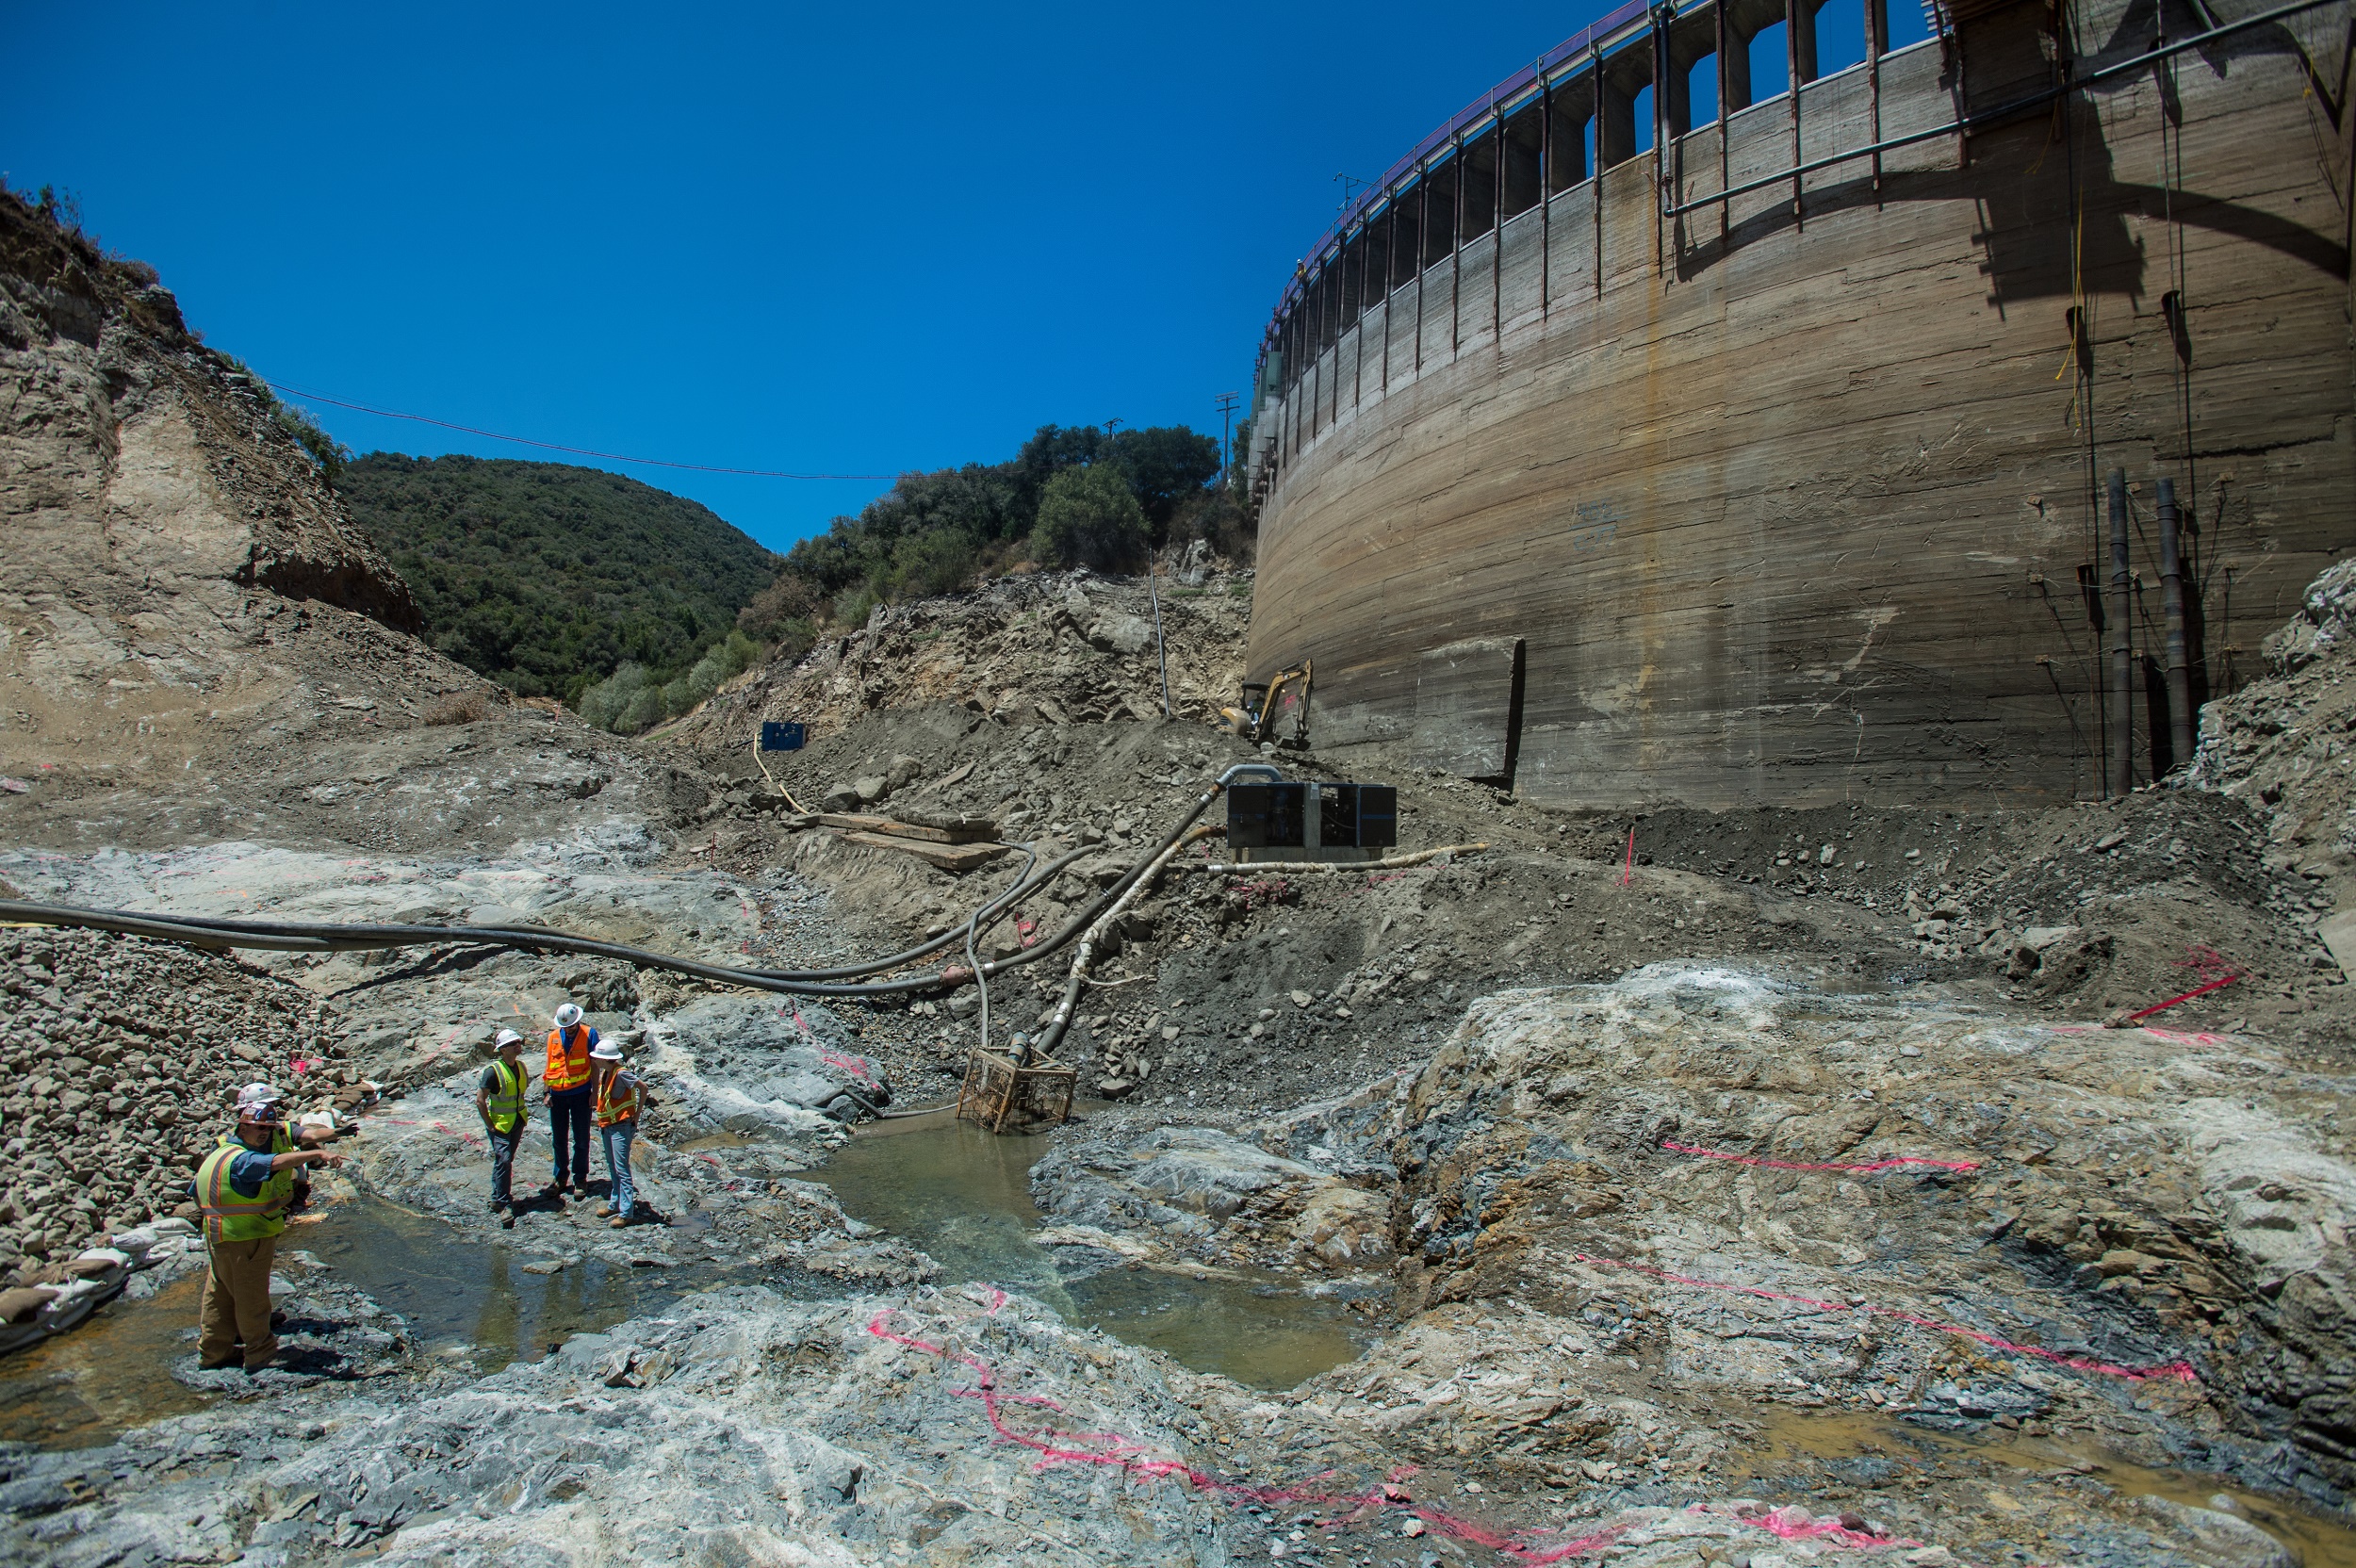 In 2015, California tore down the 106-foot-high San Clemente Dam on the Carmel River because the dam was at risk of collapsing in an earthquake. Photo by Kelly Grow / California Department of Water Resources